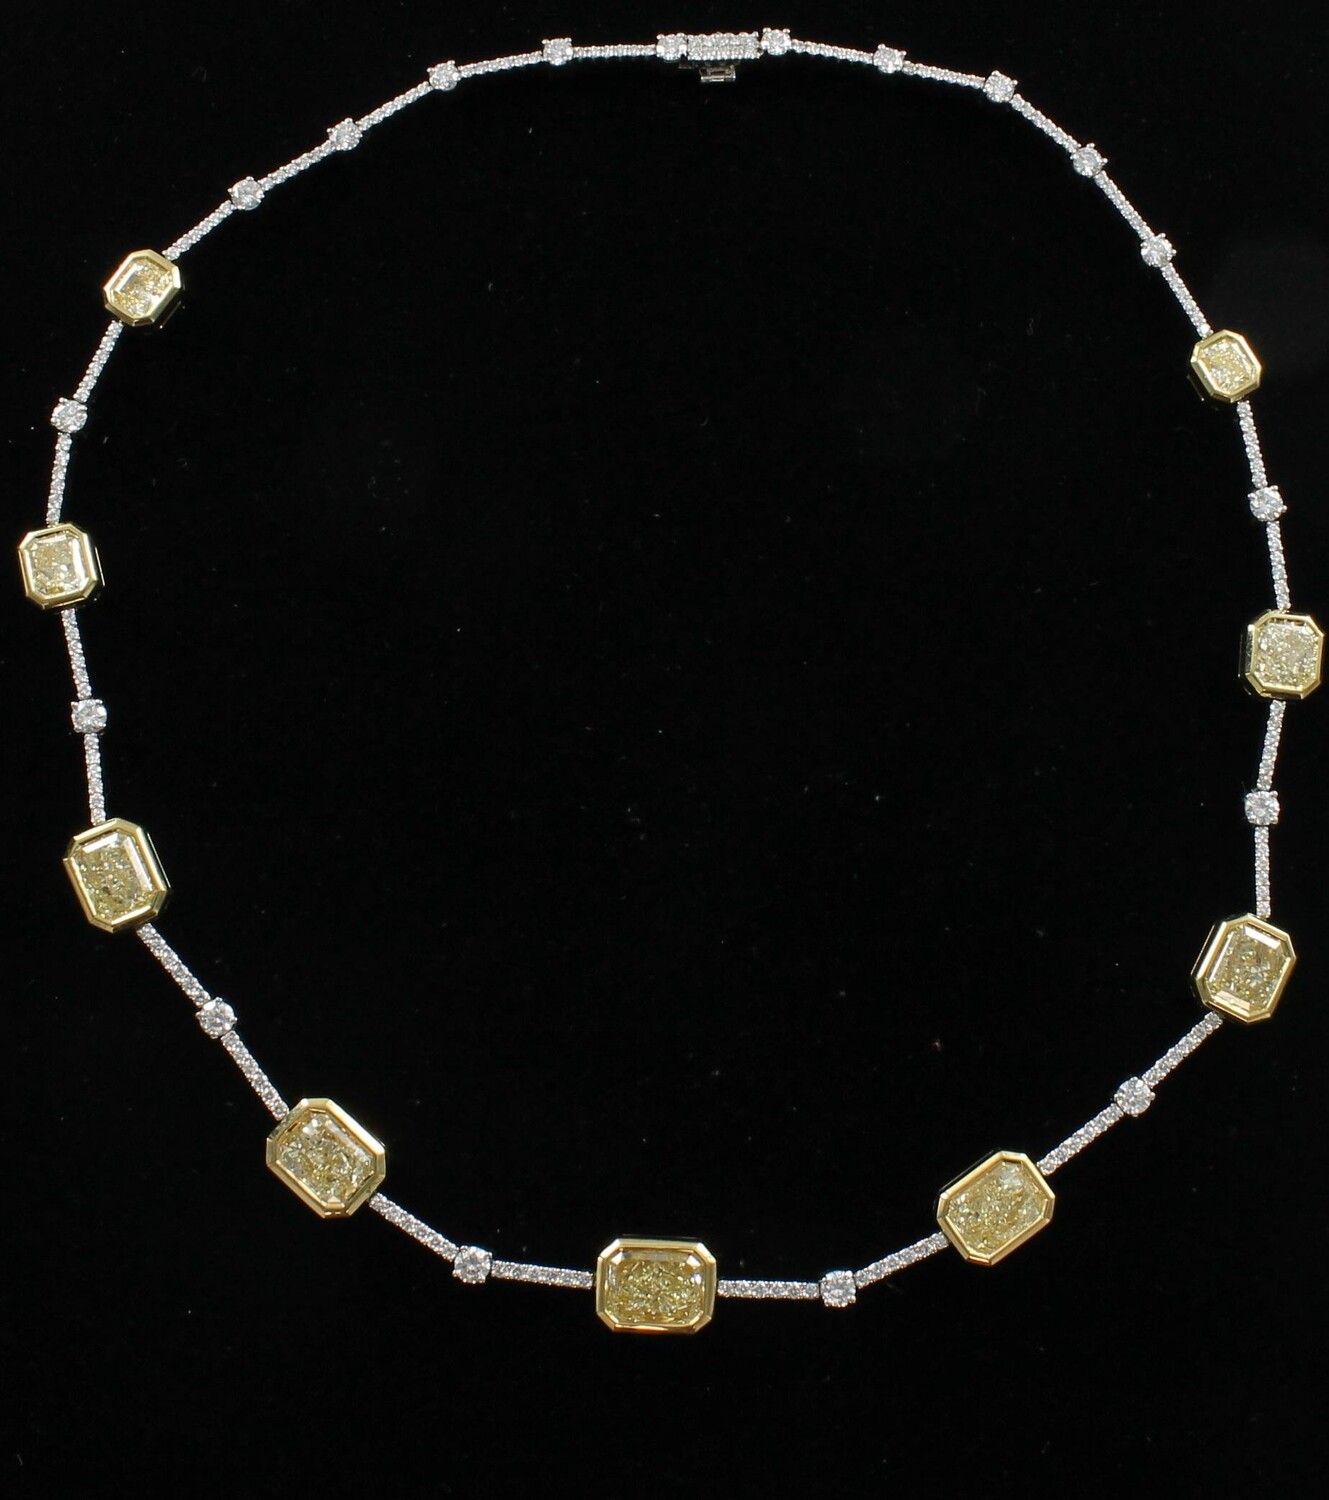 18KT AND PLATINUM NECKLACE WITH 16.0 CT TW OF FANCY YELLOW DIAMONDS & 4.0 CT TW OF WHITE DIAMONDS